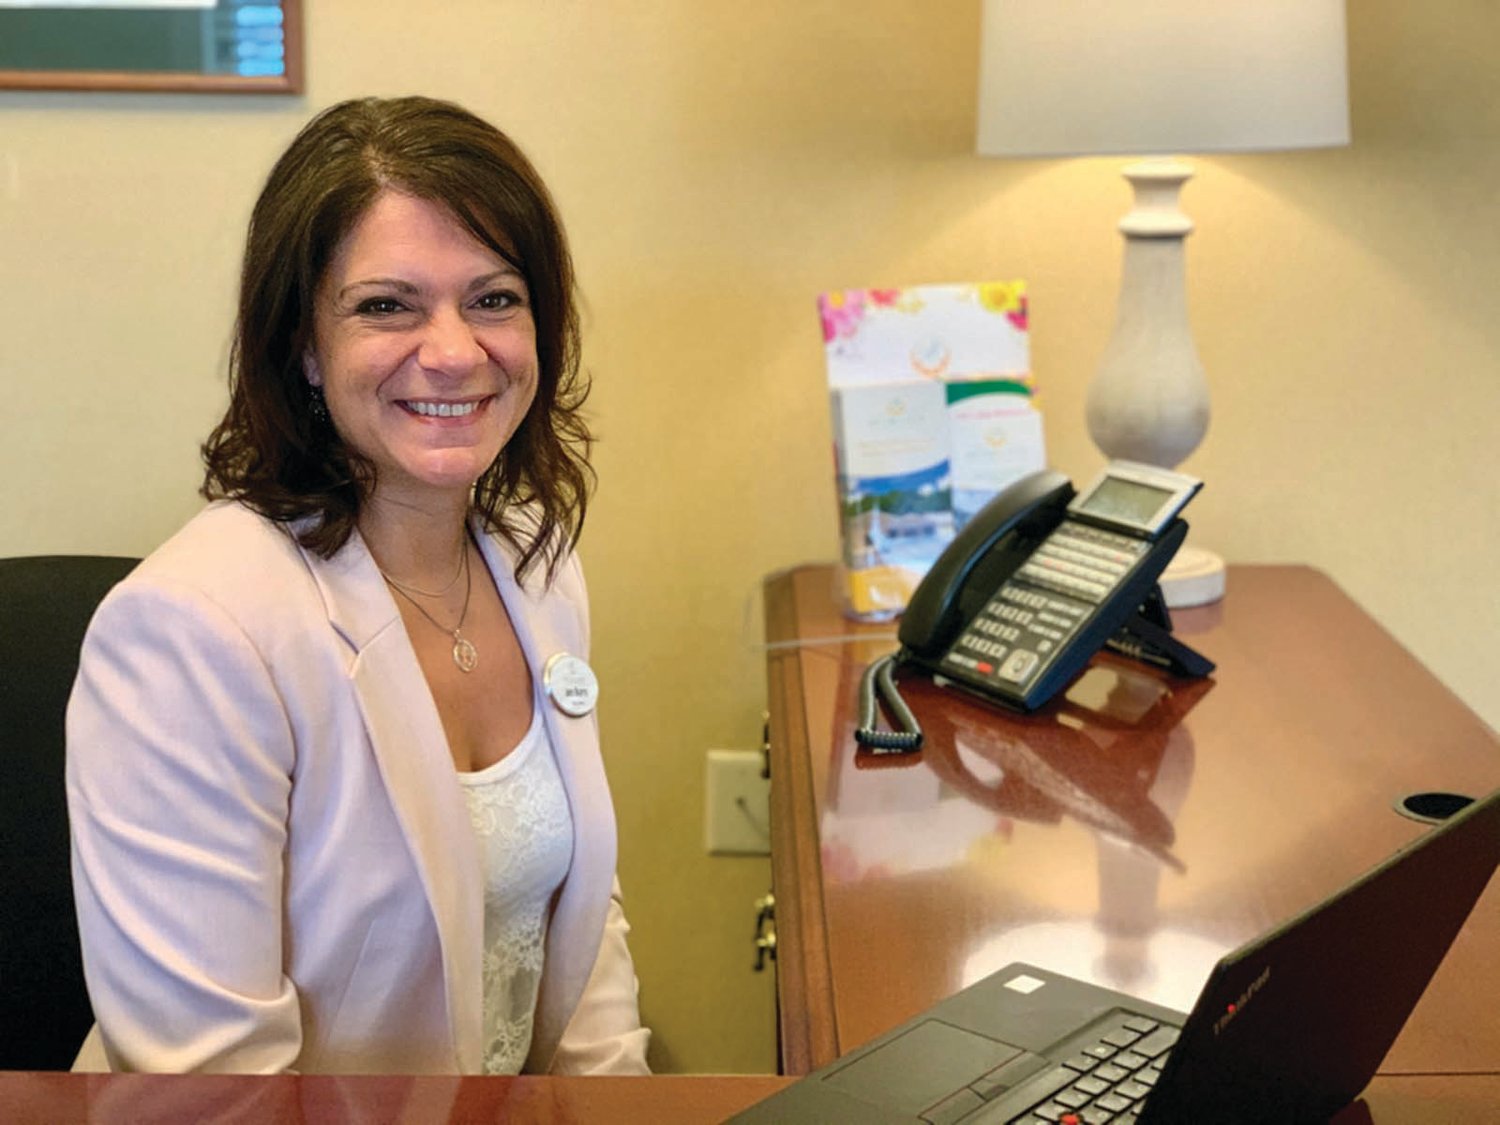 SUPER SMILE: Johnston native Jen Burns, who is highly-respected in the long-term care industry as well as throughout the community, is excited about taking on the challenge as sales director at ultra-modern independent and assisting living facility that will be known as the Preserve.